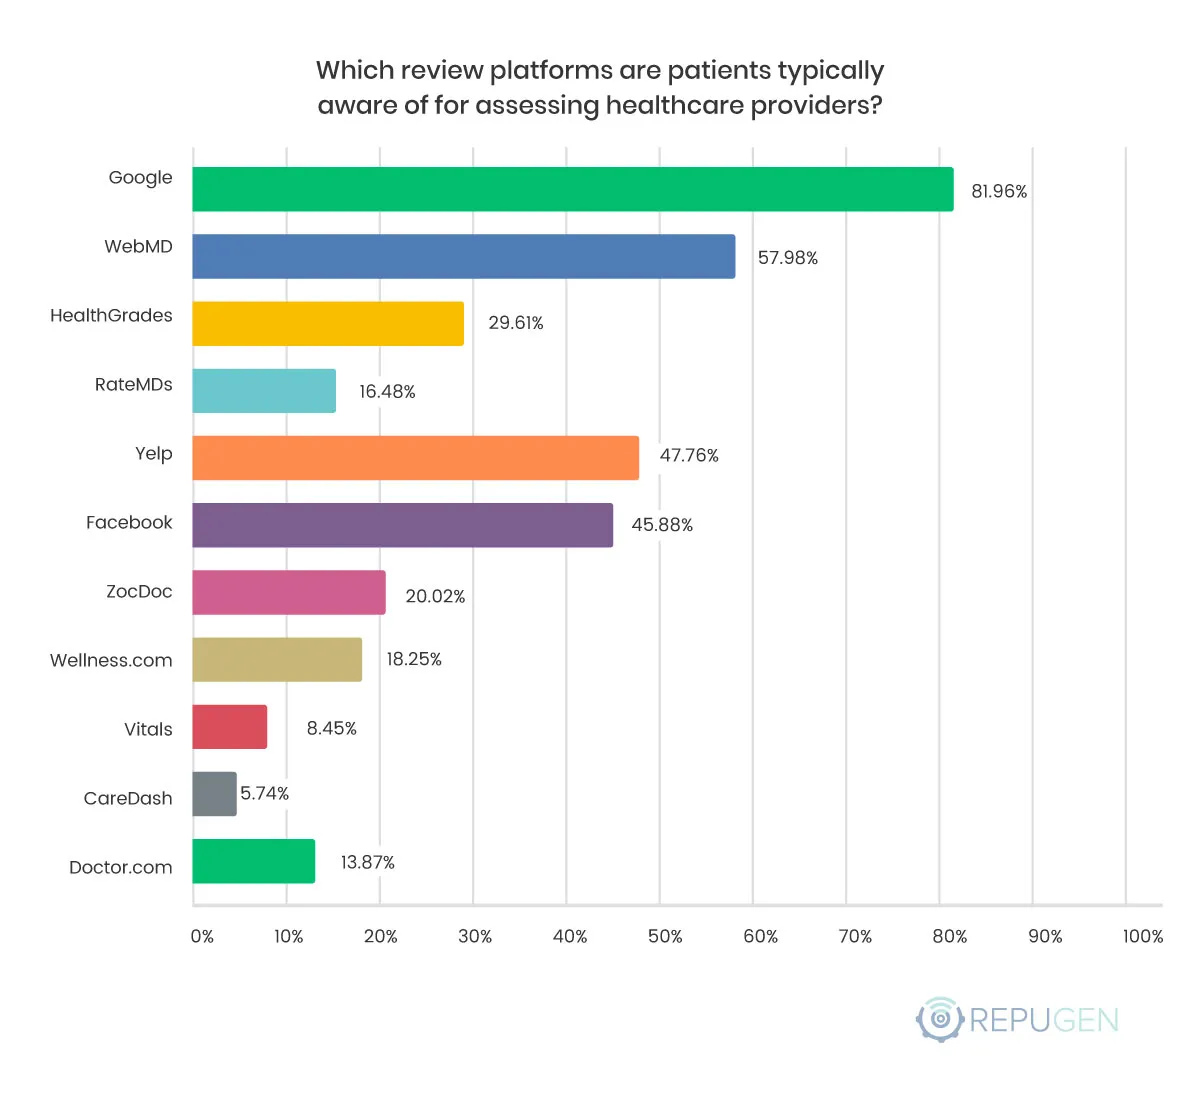 Which review platforms are patients typically aware of for assessing healthcare providers?